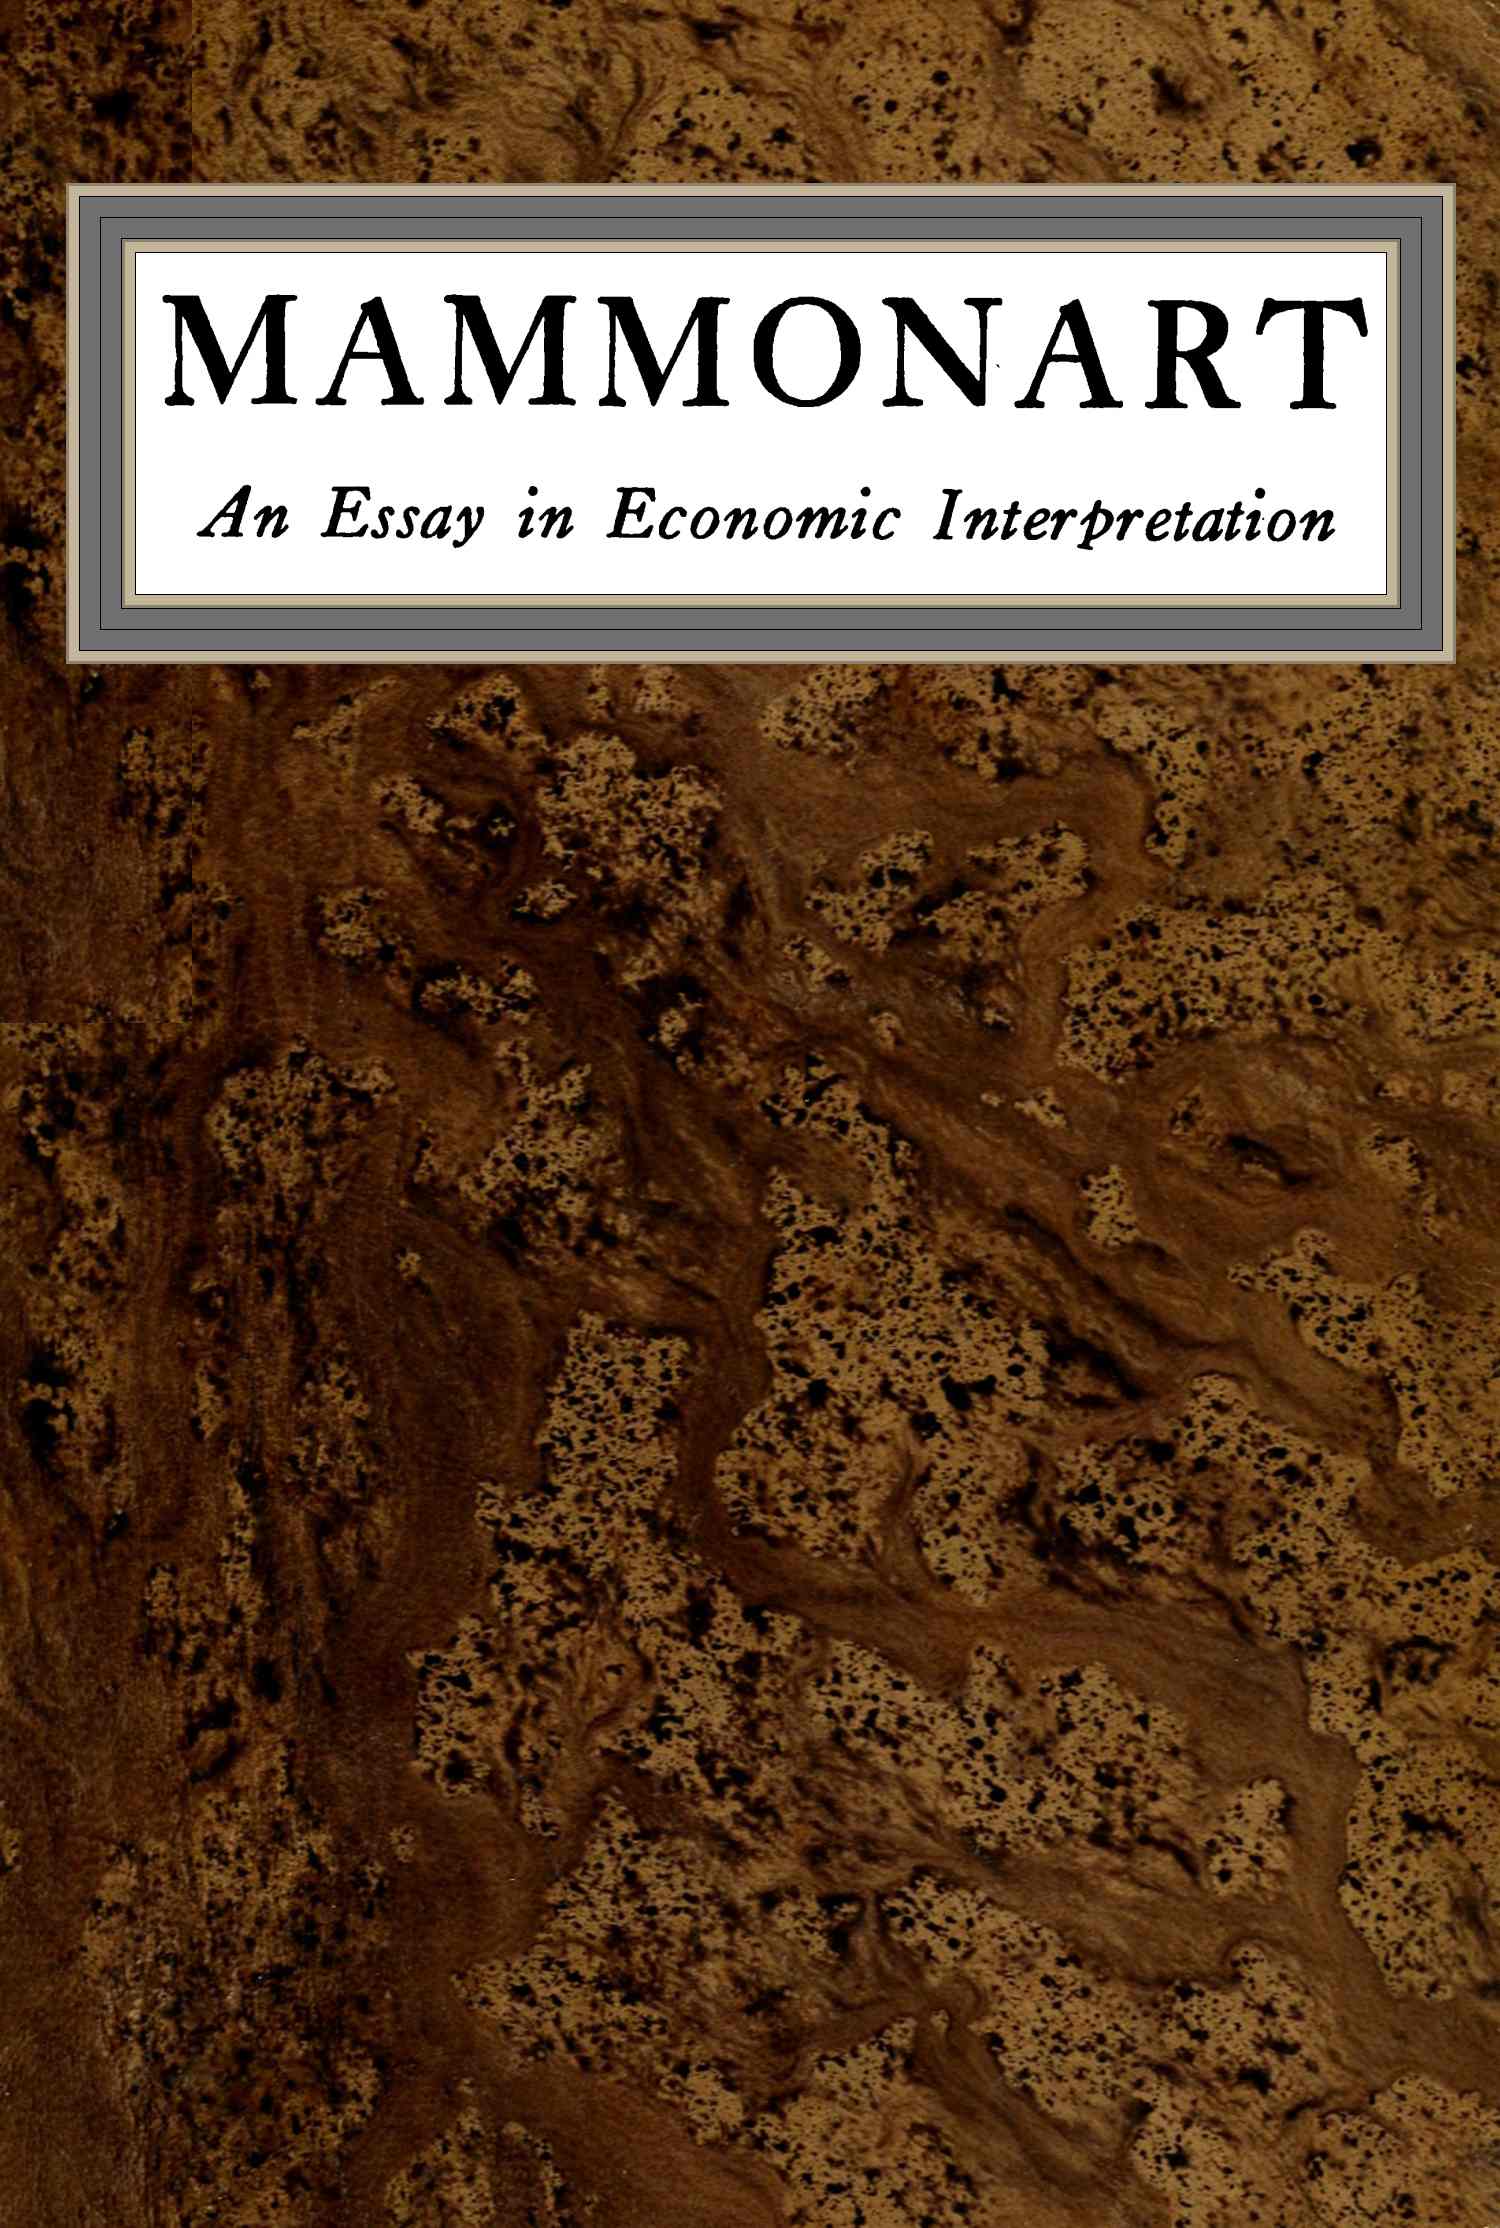 The Project Gutenberg eBook of Mammonart, by Upton Sinclair.